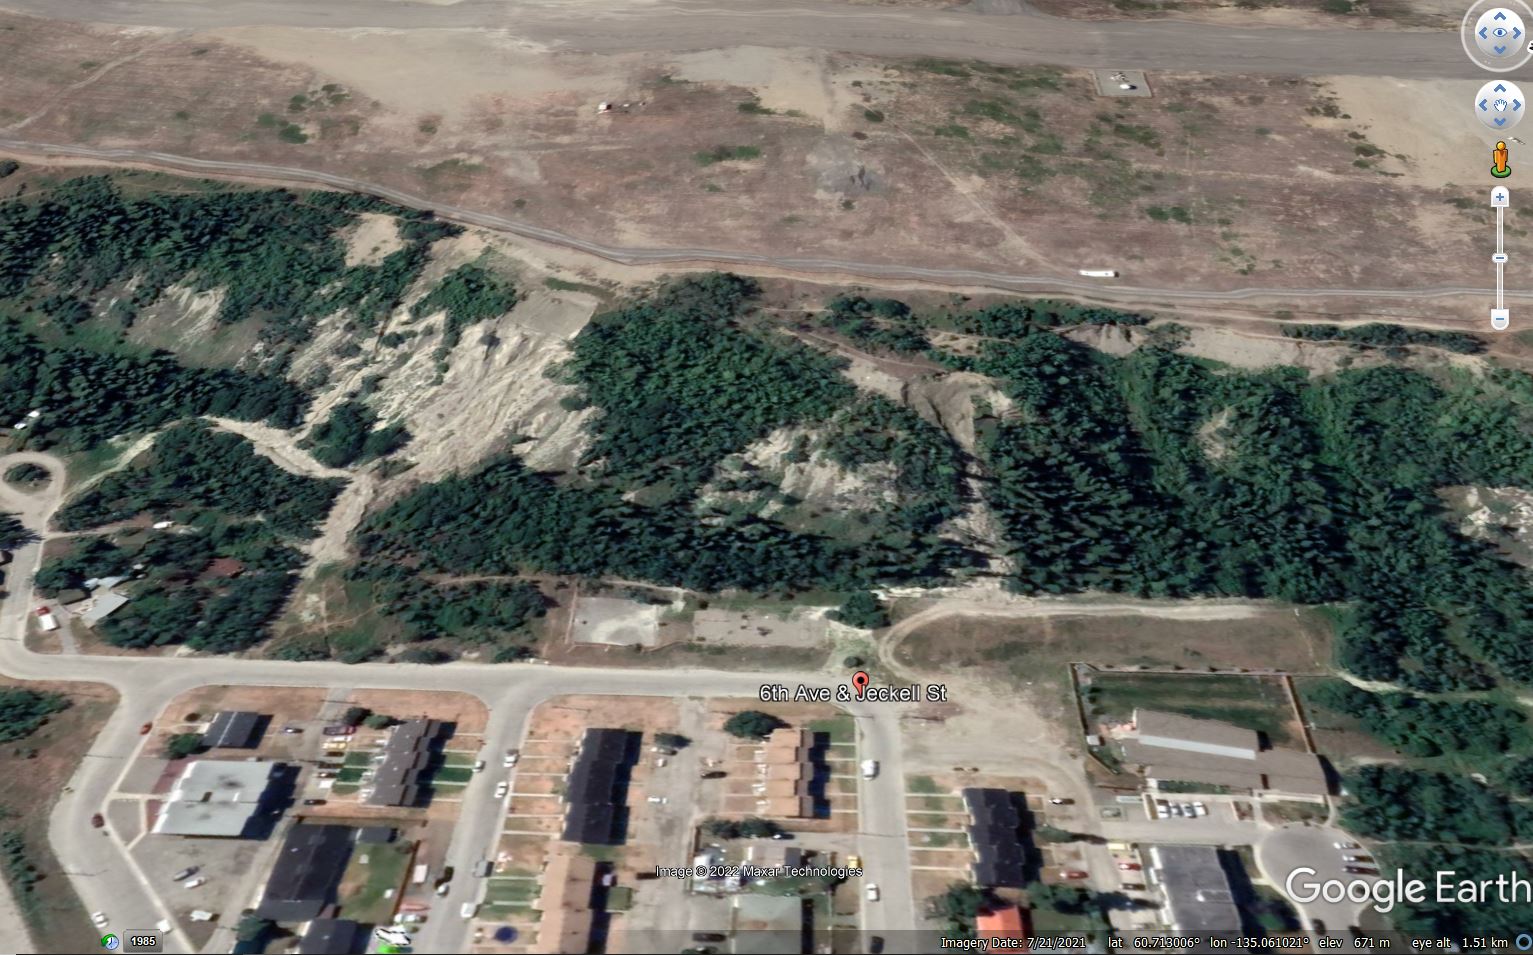 The site of the 28 May 2022landslide on the Whitehorse escarpment in the the Yukon, from Google Earth.